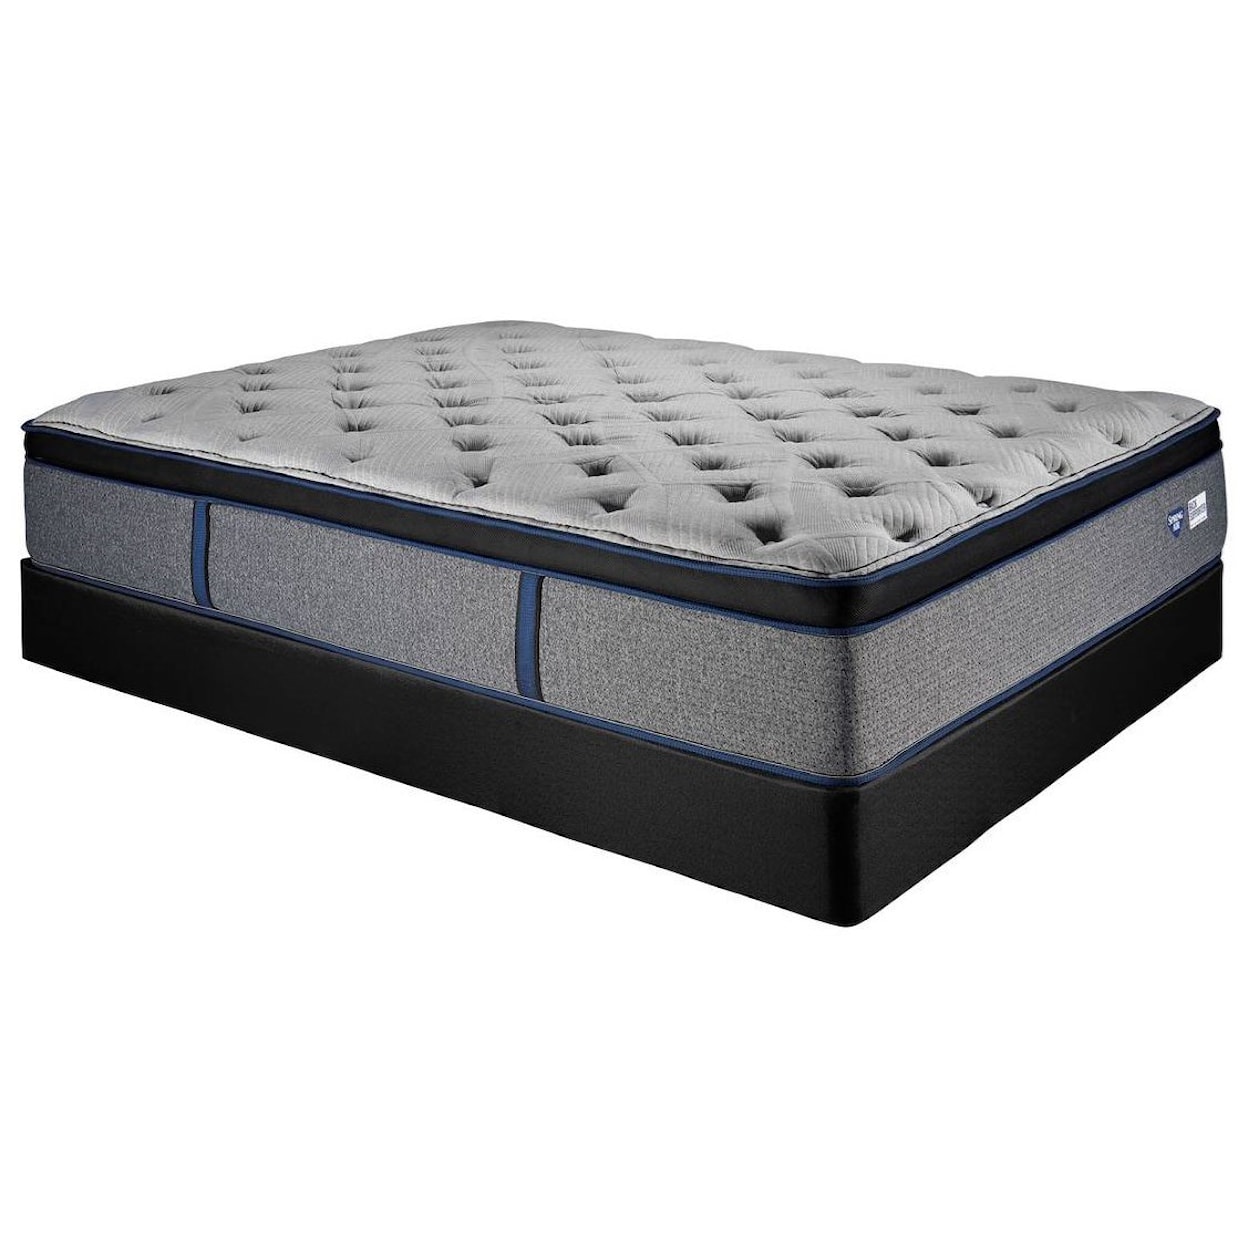 Spring Air Calypso ET King Pocketed Coil Mattress Low Pro Set